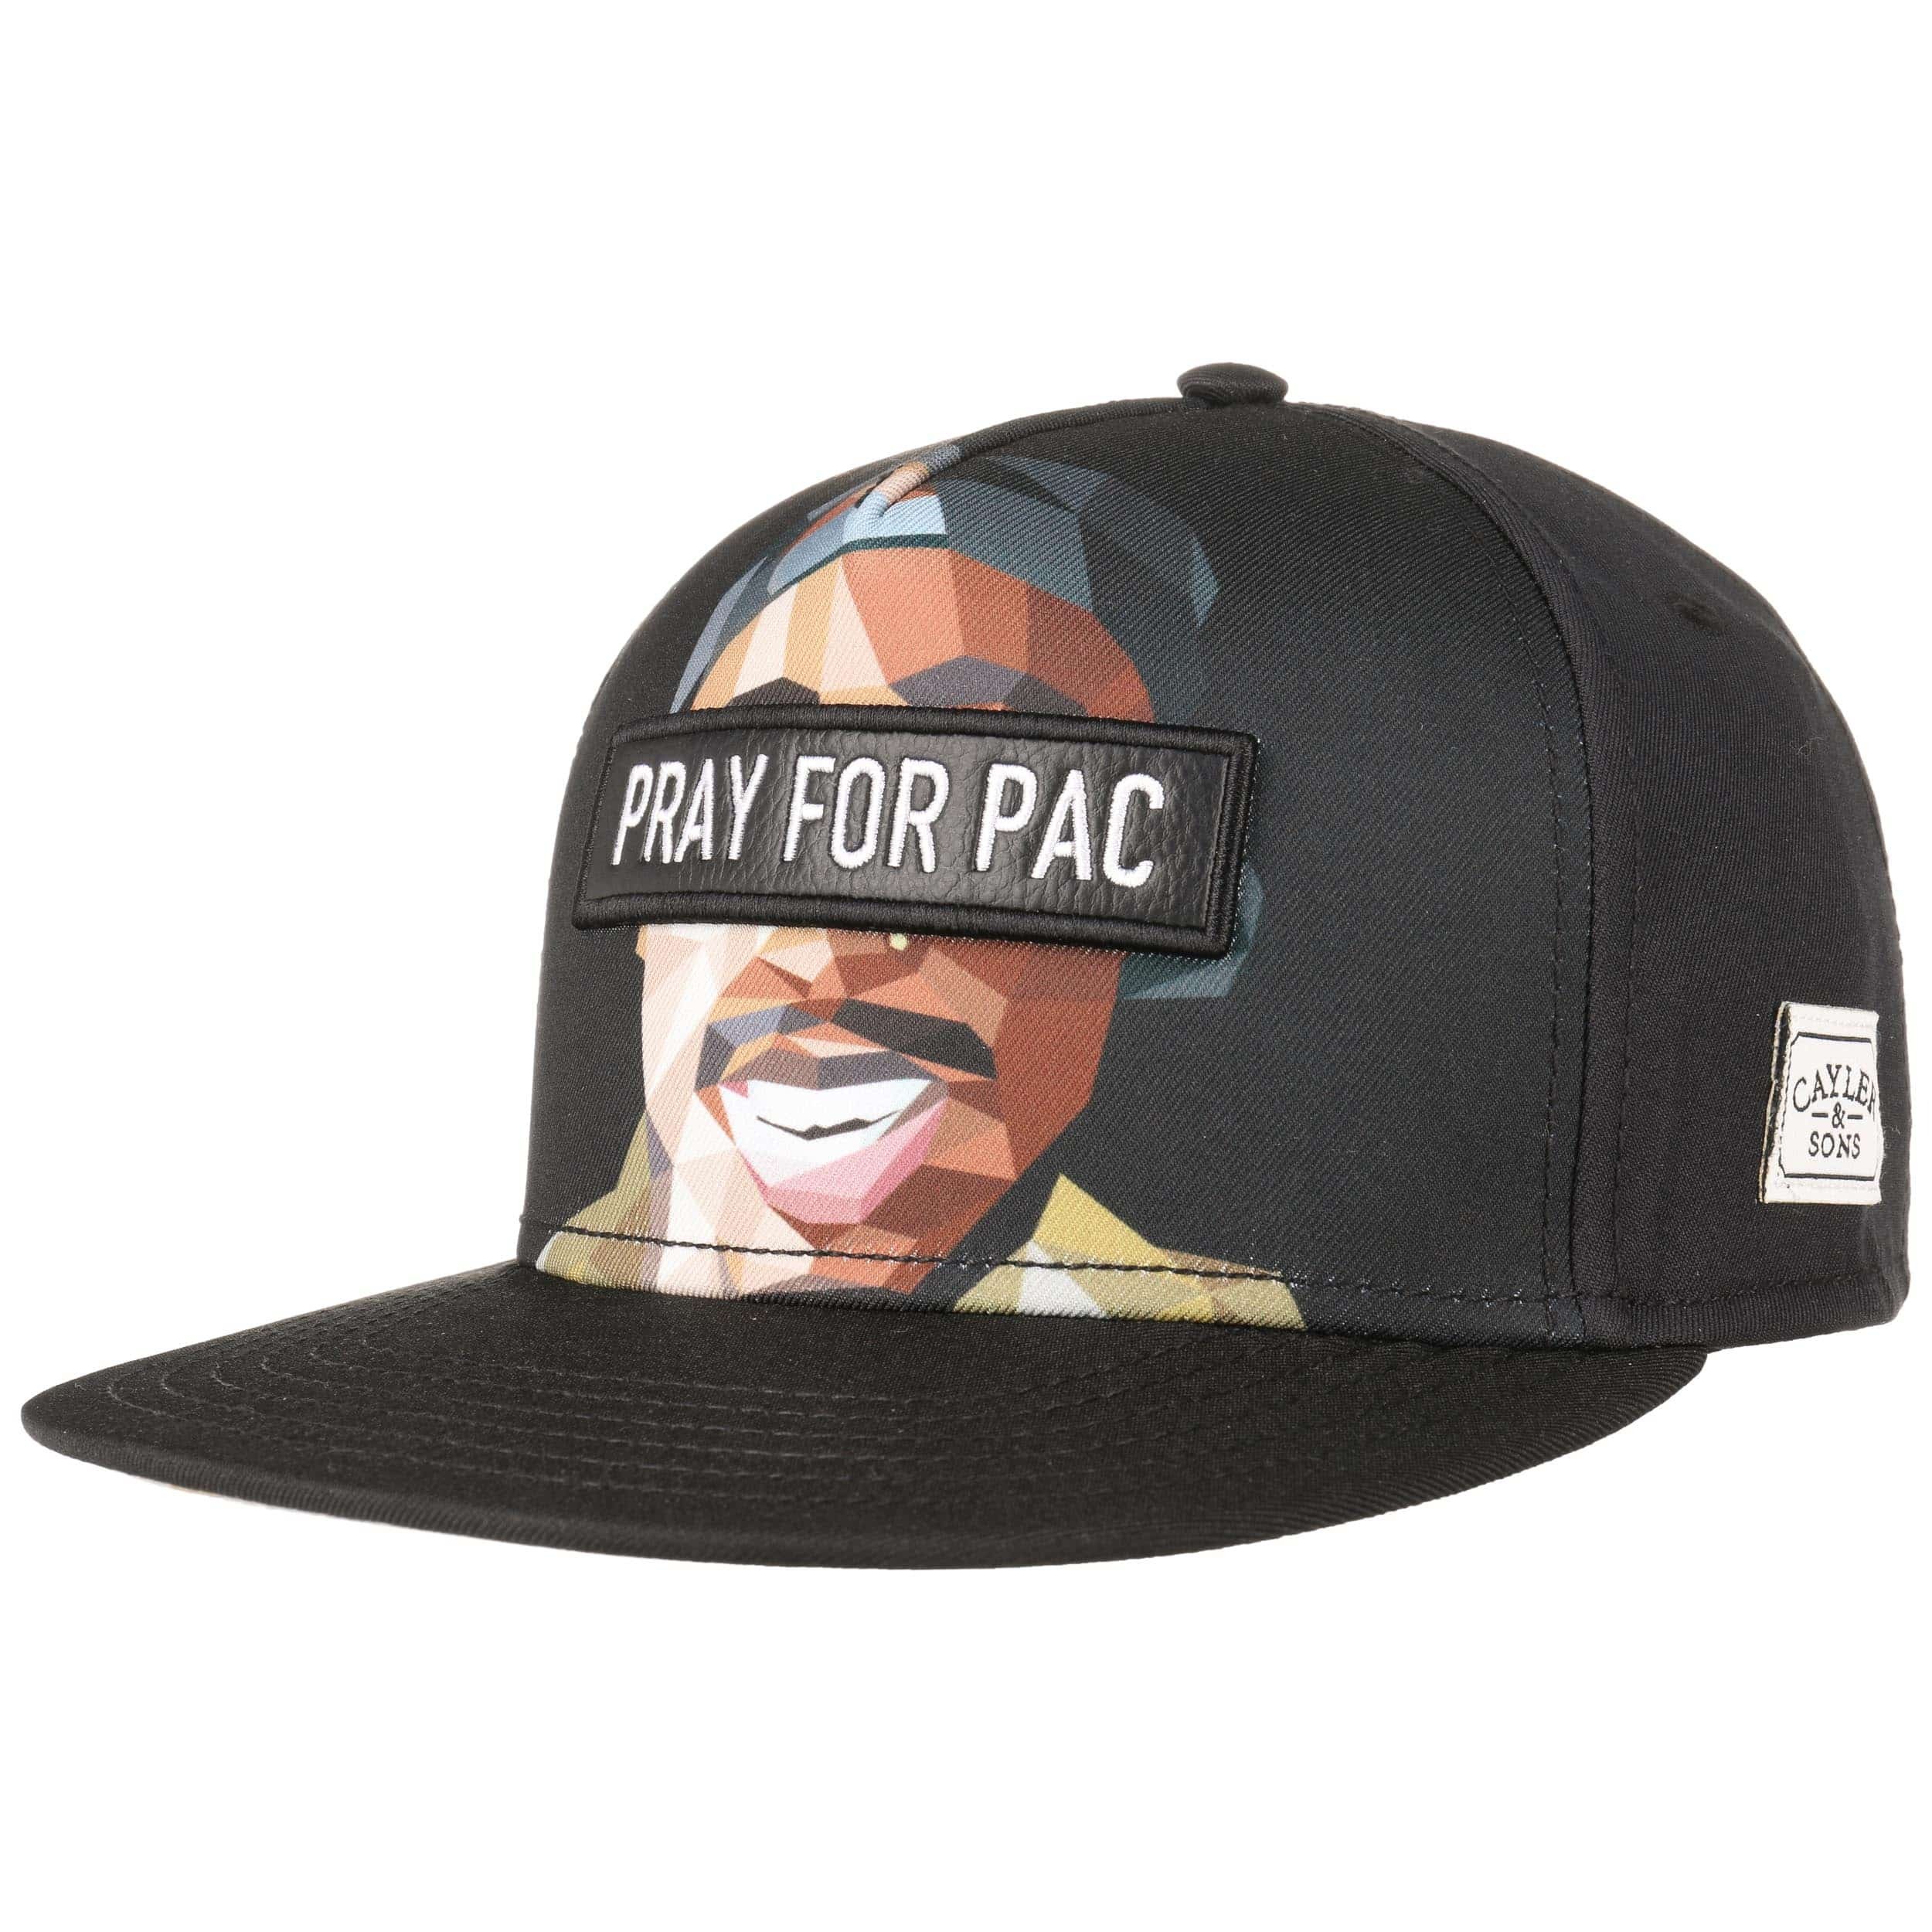 € & by Pacasso - Cap 37,95 Snapback Cayler Sons